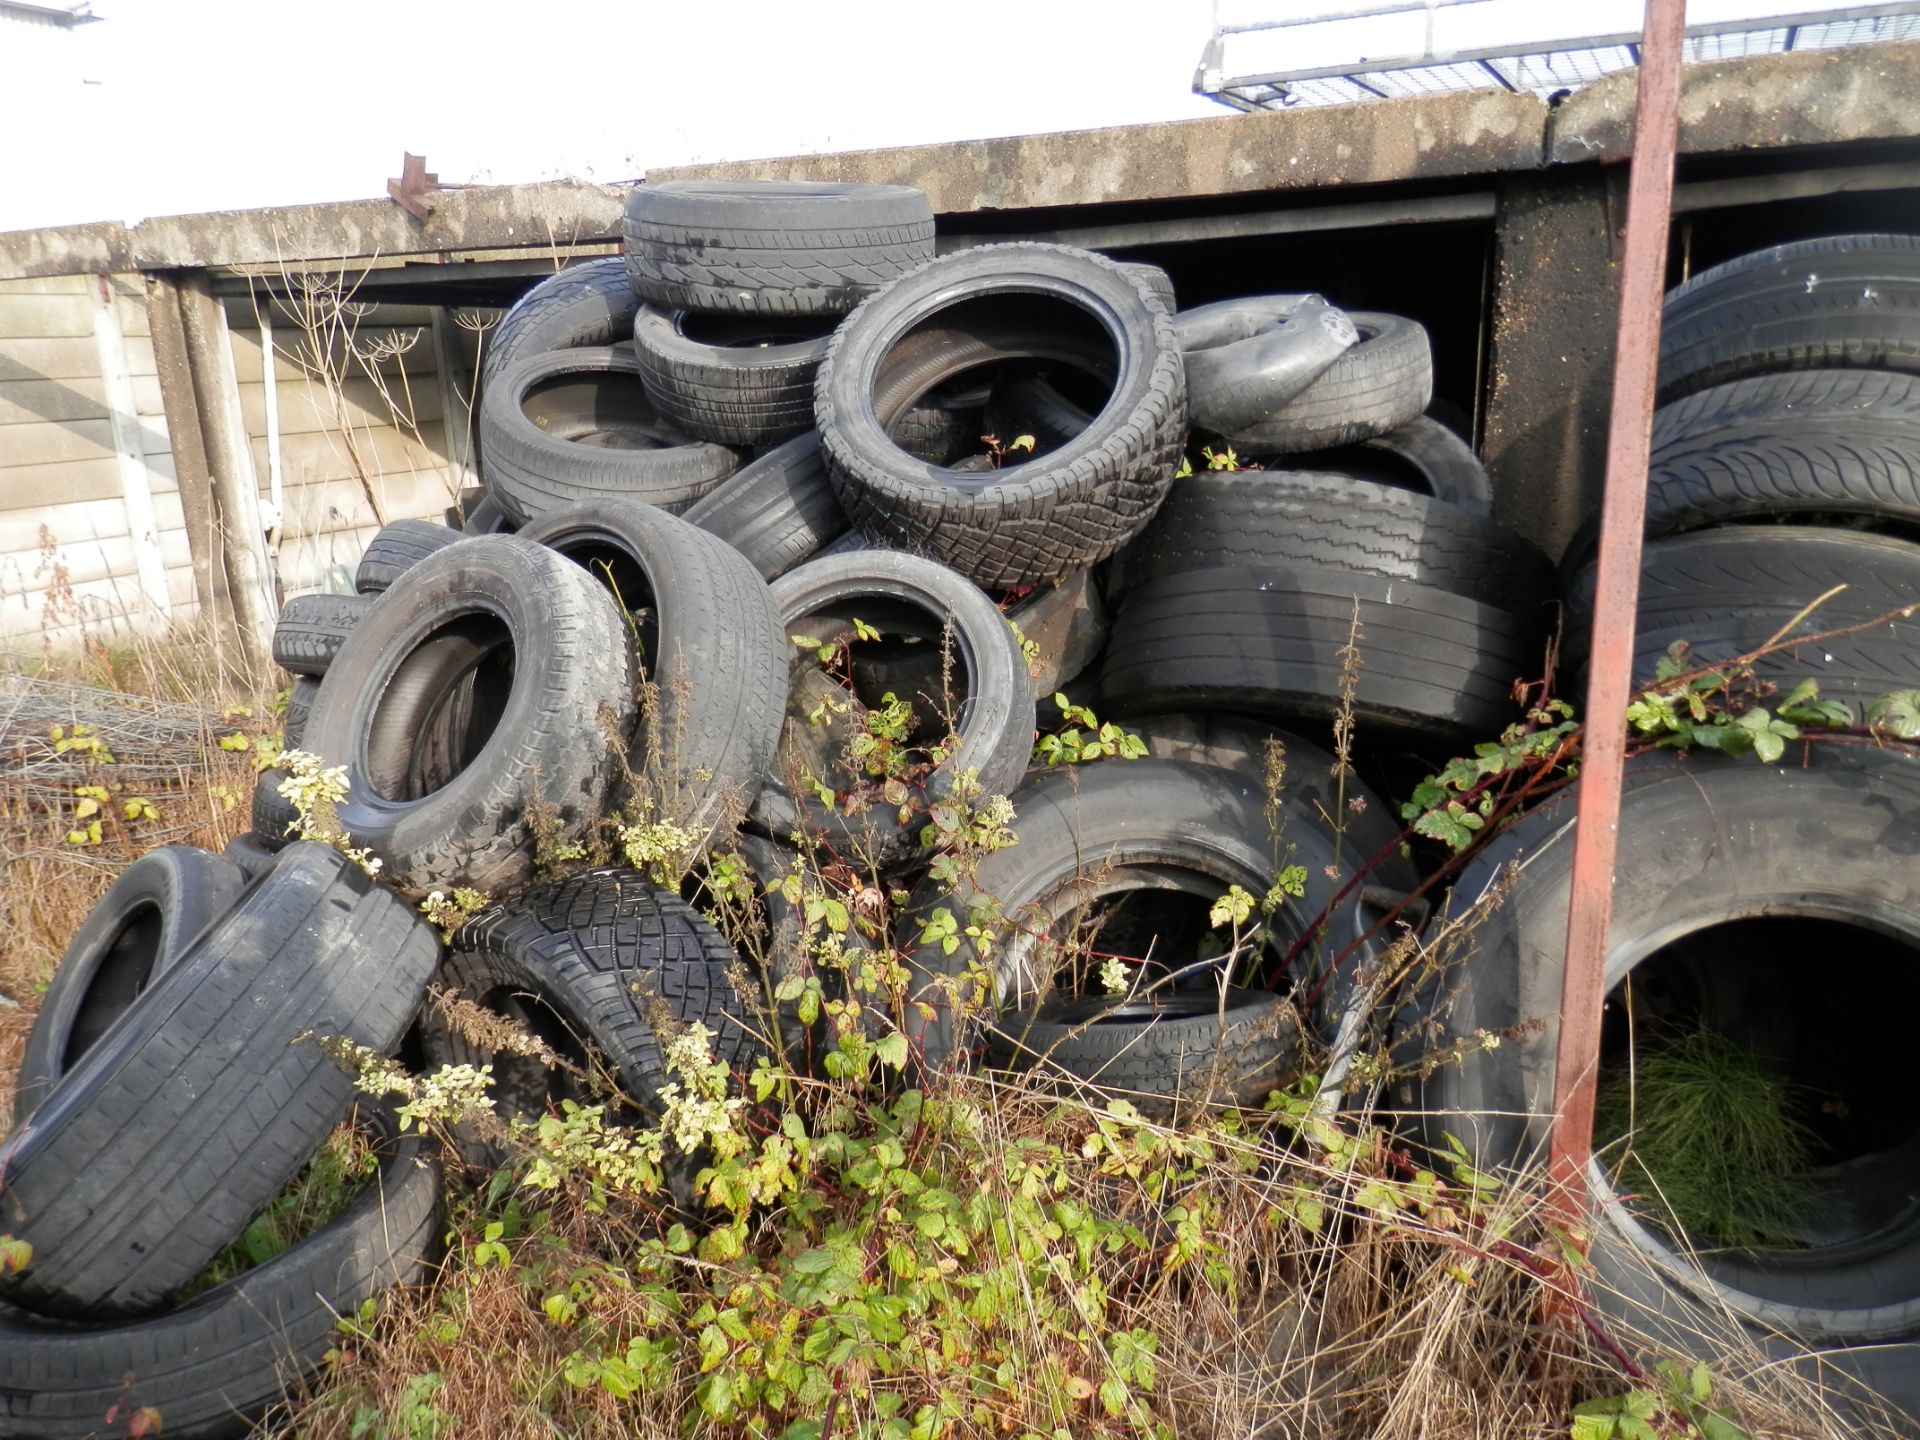 3 GARAGES FULL OF USED, PART WORN TYRES. ASSORTED FROM CAR TO LORRY TYRES. POSSIBLY 500+